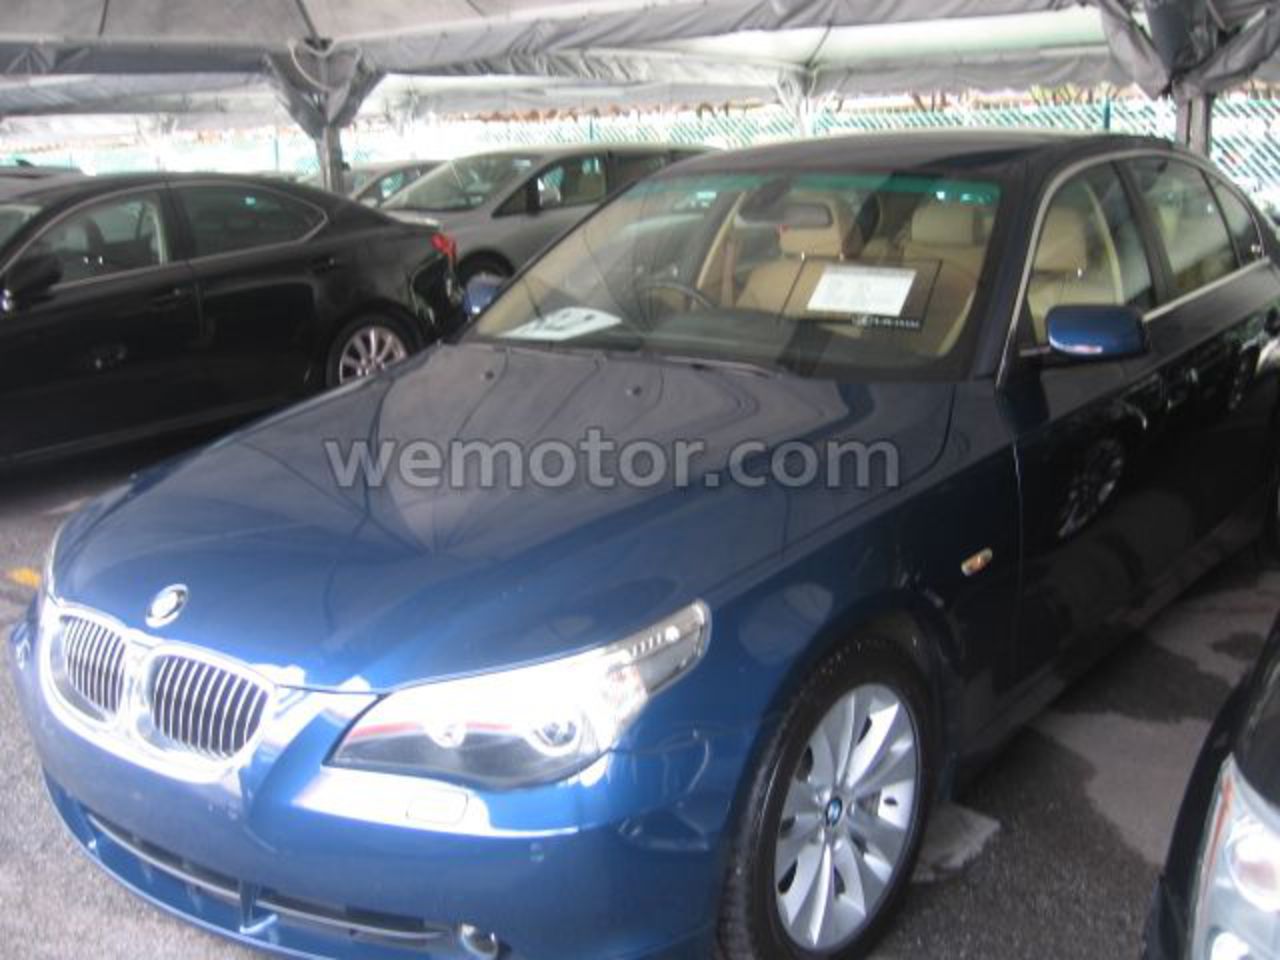 BMW 525iSE: Photo gallery, complete information about model ...